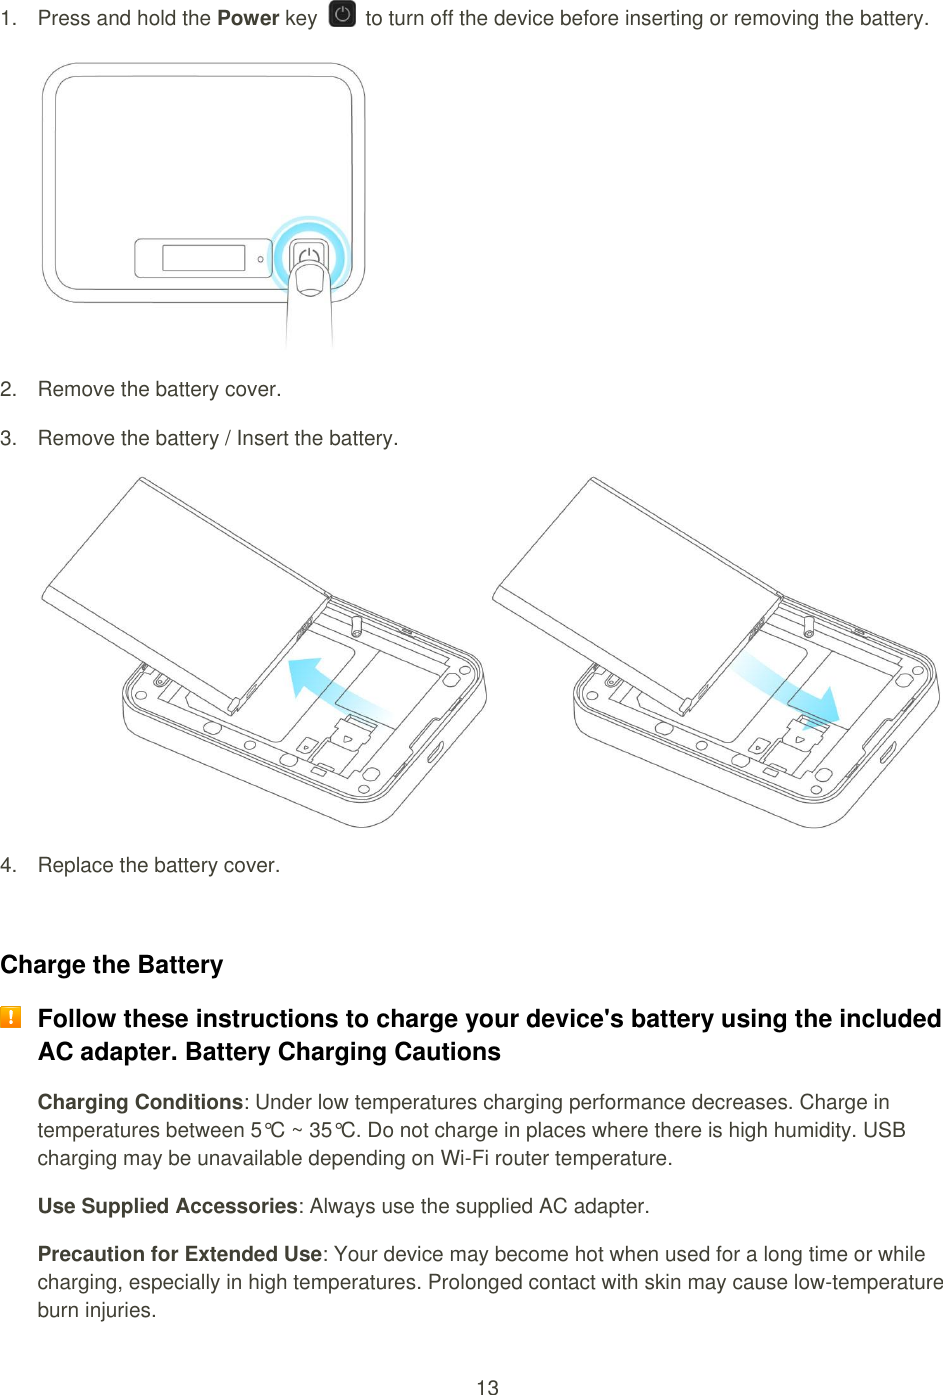 13  1.  Press and hold the Power key    to turn off the device before inserting or removing the battery.   2.  Remove the battery cover. 3.  Remove the battery / Insert the battery.  4.  Replace the battery cover.  Charge the Battery  Follow these instructions to charge your device&apos;s battery using the included AC adapter. Battery Charging Cautions Charging Conditions: Under low temperatures charging performance decreases. Charge in temperatures between 5°C ~ 35°C. Do not charge in places where there is high humidity. USB charging may be unavailable depending on Wi-Fi router temperature. Use Supplied Accessories: Always use the supplied AC adapter.   Precaution for Extended Use: Your device may become hot when used for a long time or while charging, especially in high temperatures. Prolonged contact with skin may cause low-temperature burn injuries. 